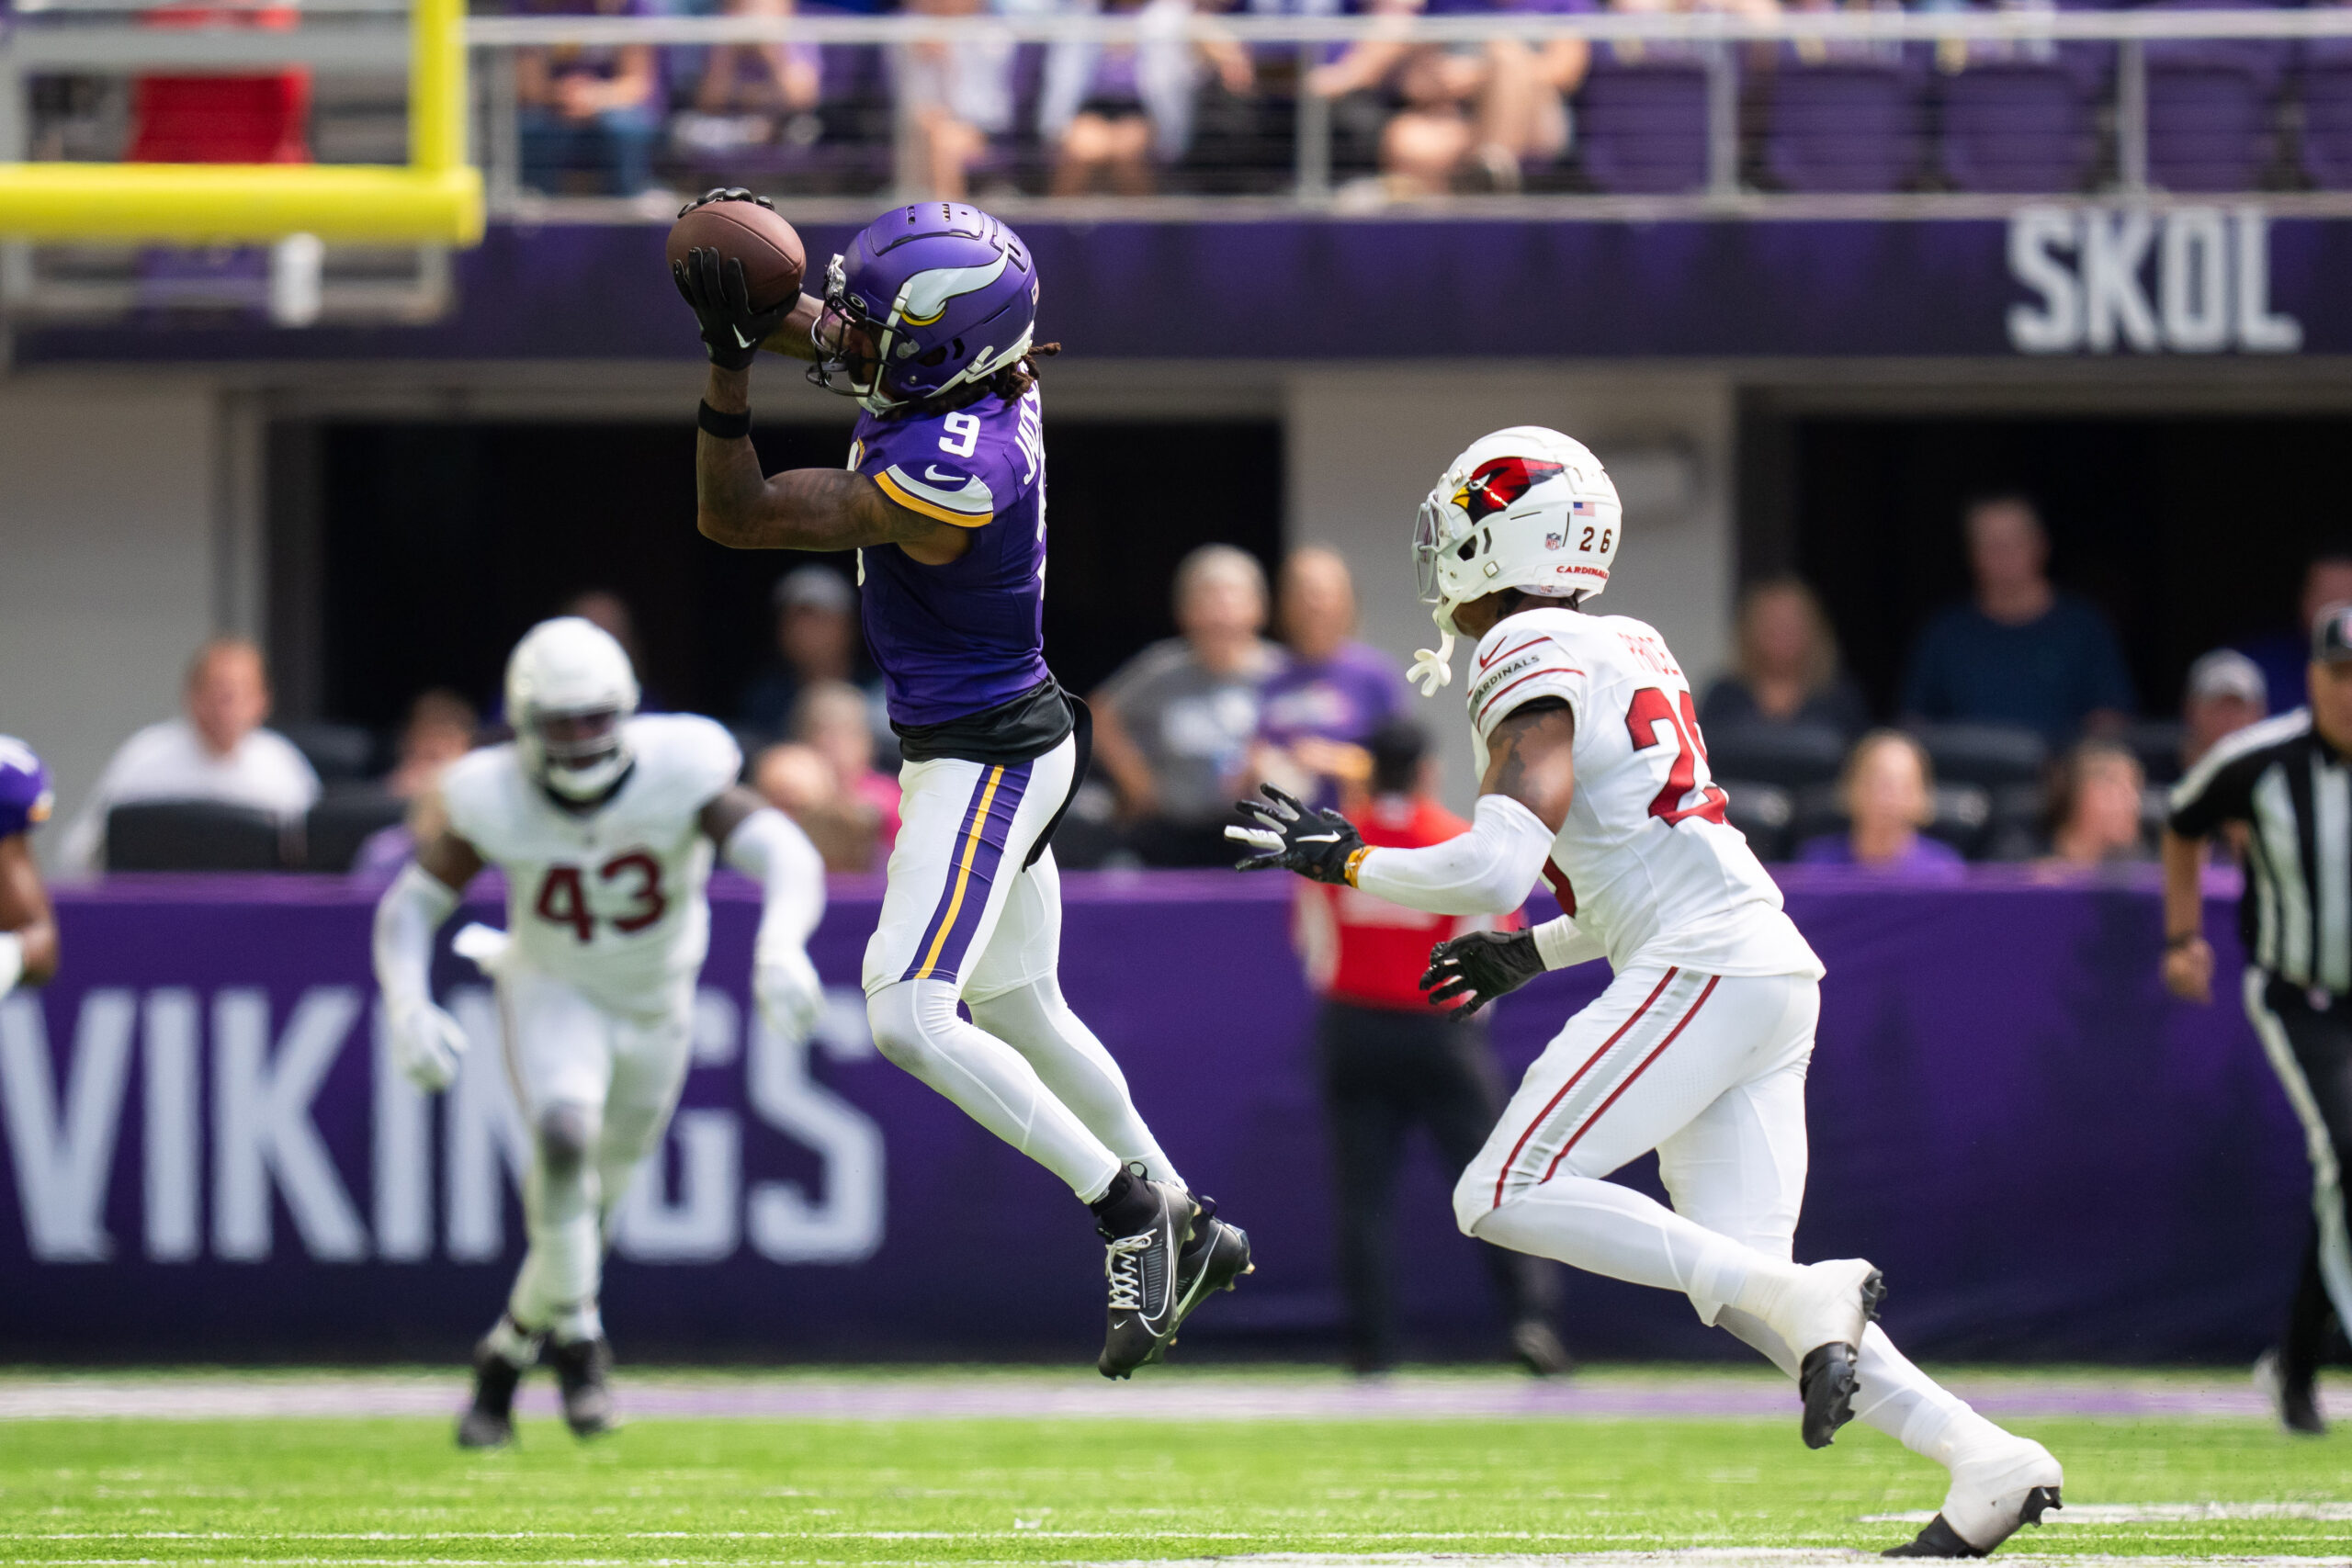 Former Michigan State WR placed on IR by Vikings 